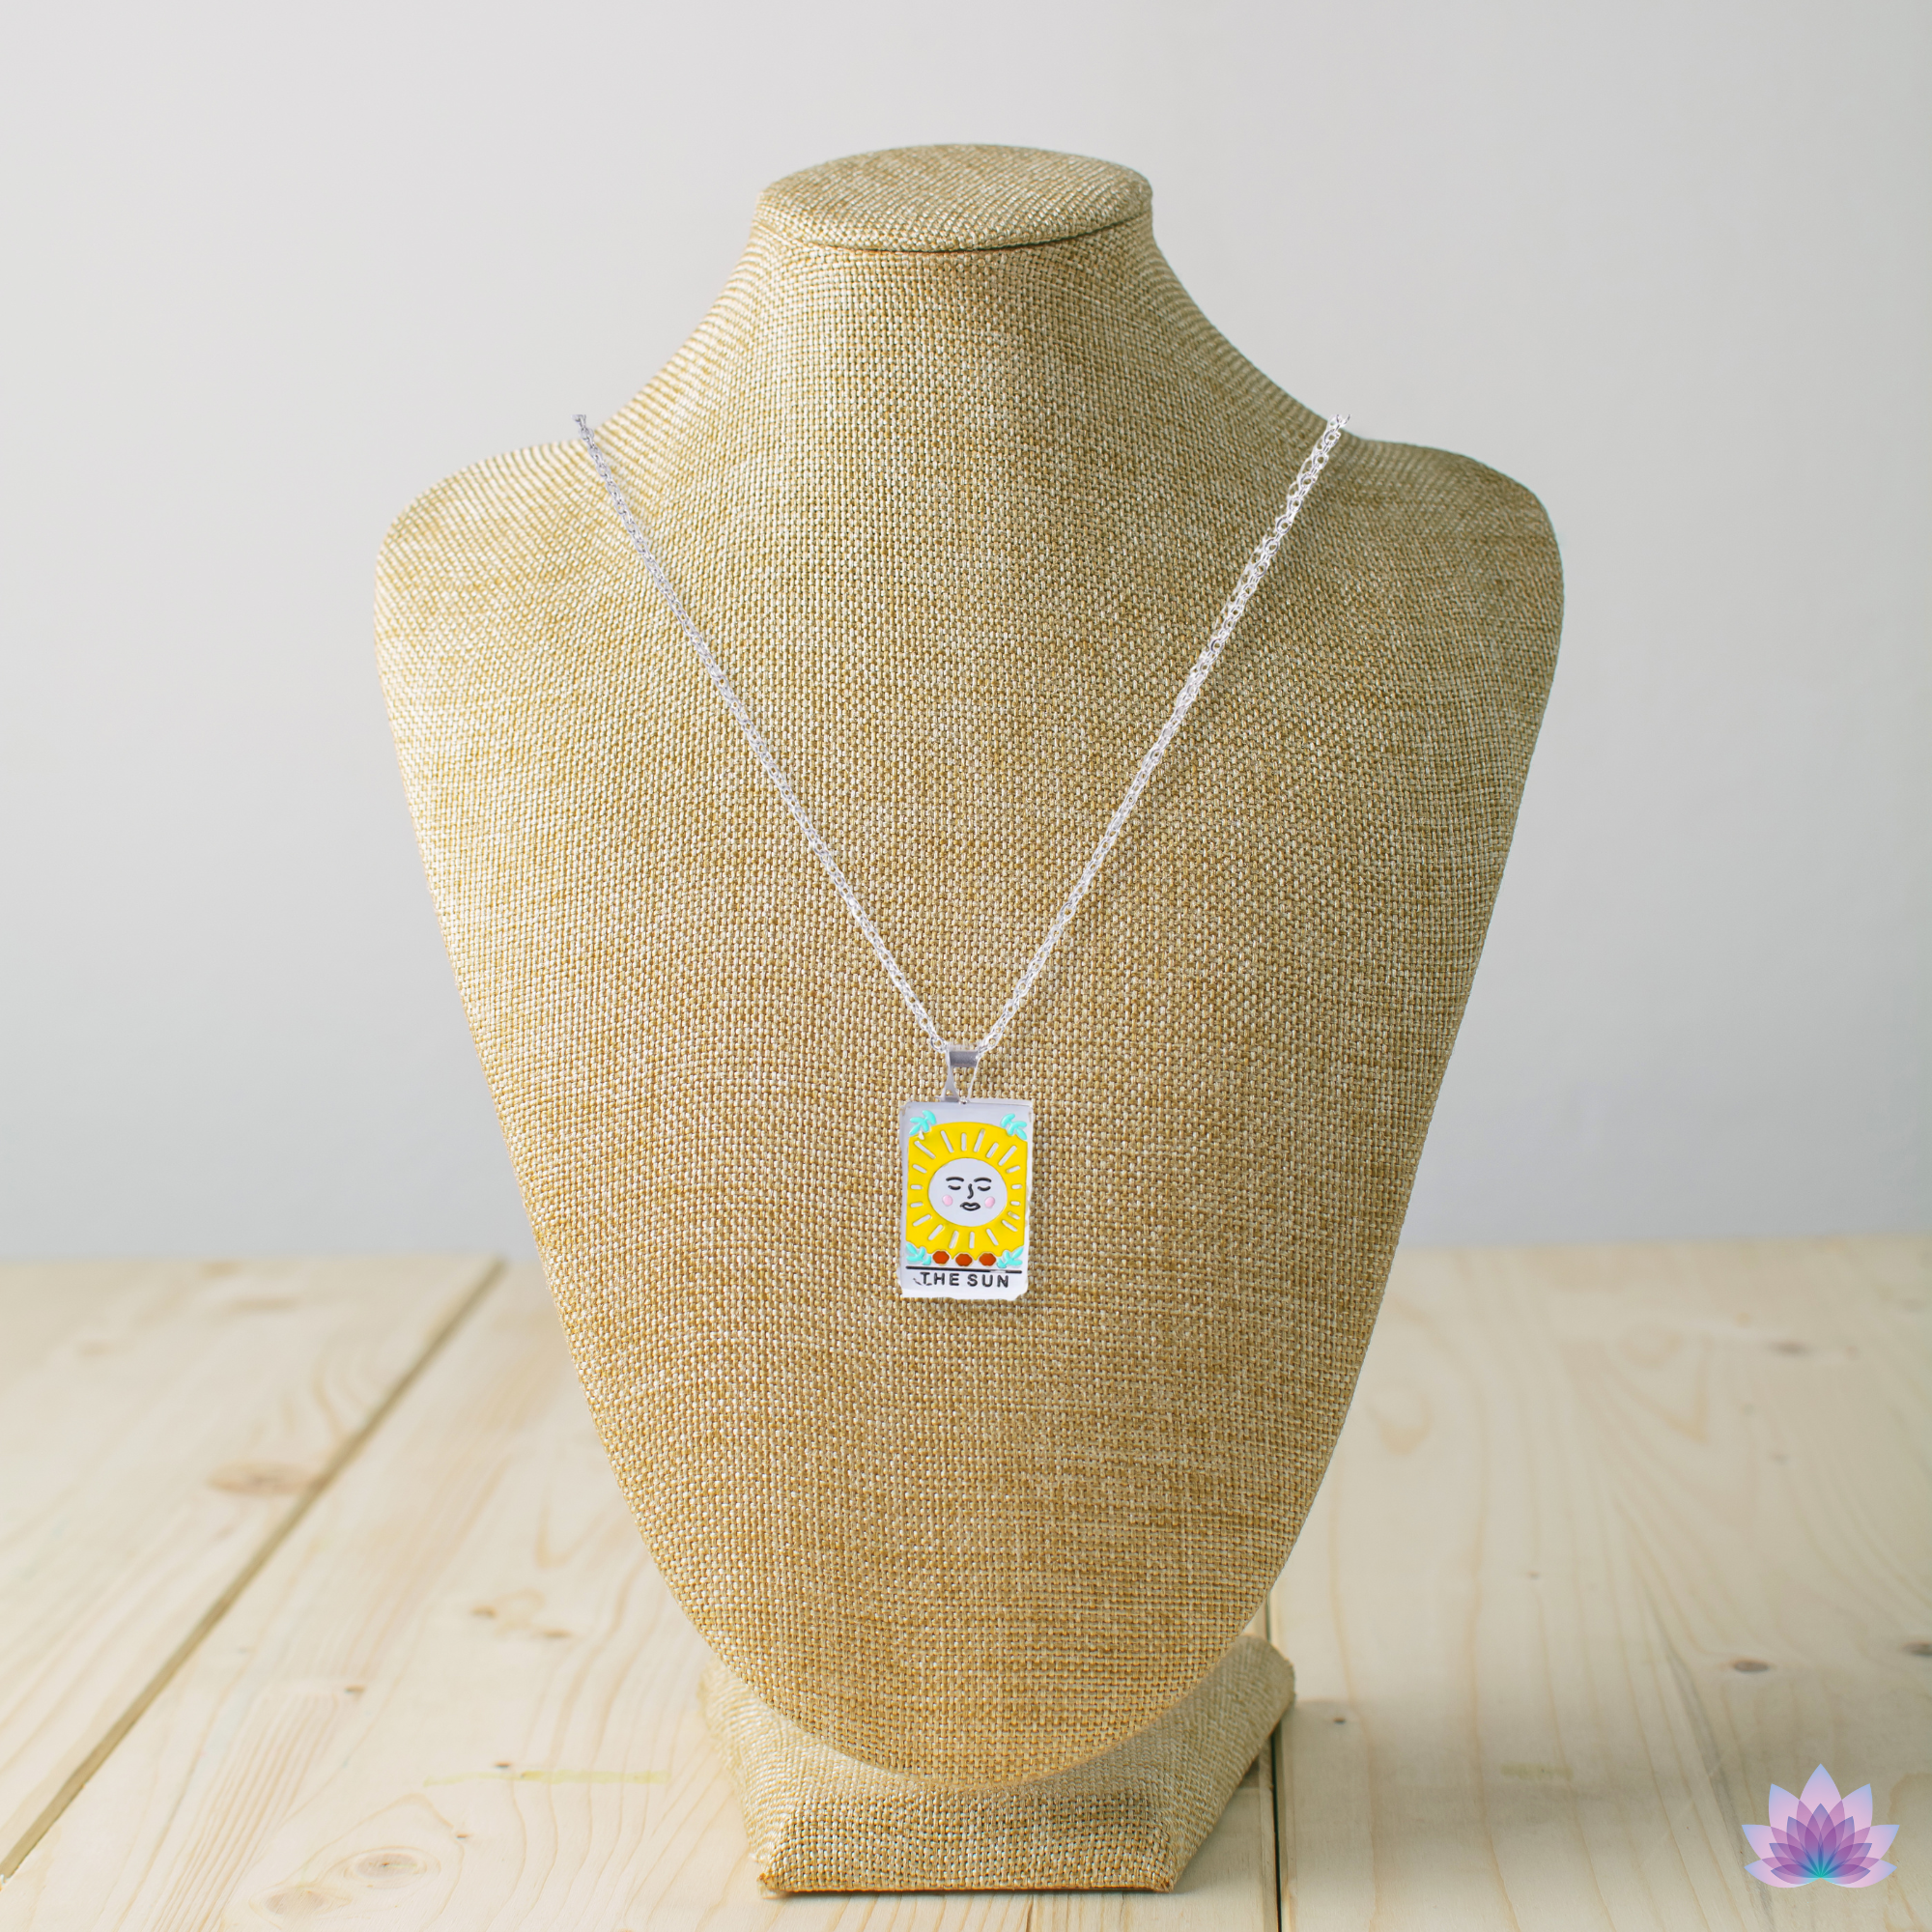 Tarot Card Necklace Of The World, Lovers, Star, Fortune & Moon Cards In Silver Or Gold Plated Stainless Steel • Dainty Chain Witchy Pendant • Apollo Tarot Online Shop